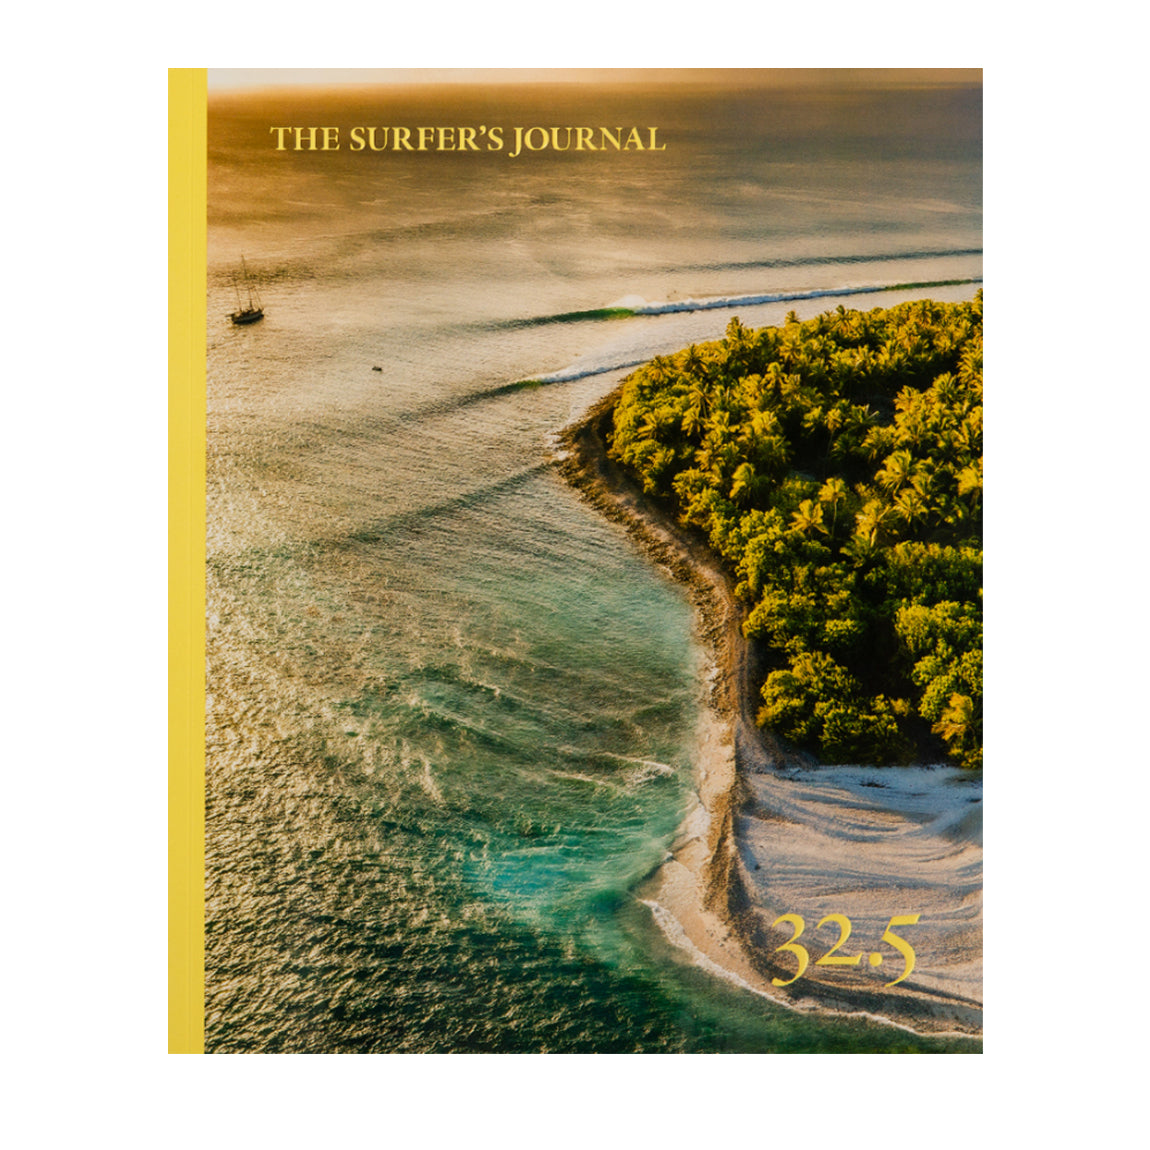 THE SURFER'S JOURNAL - ISSUE 32.5